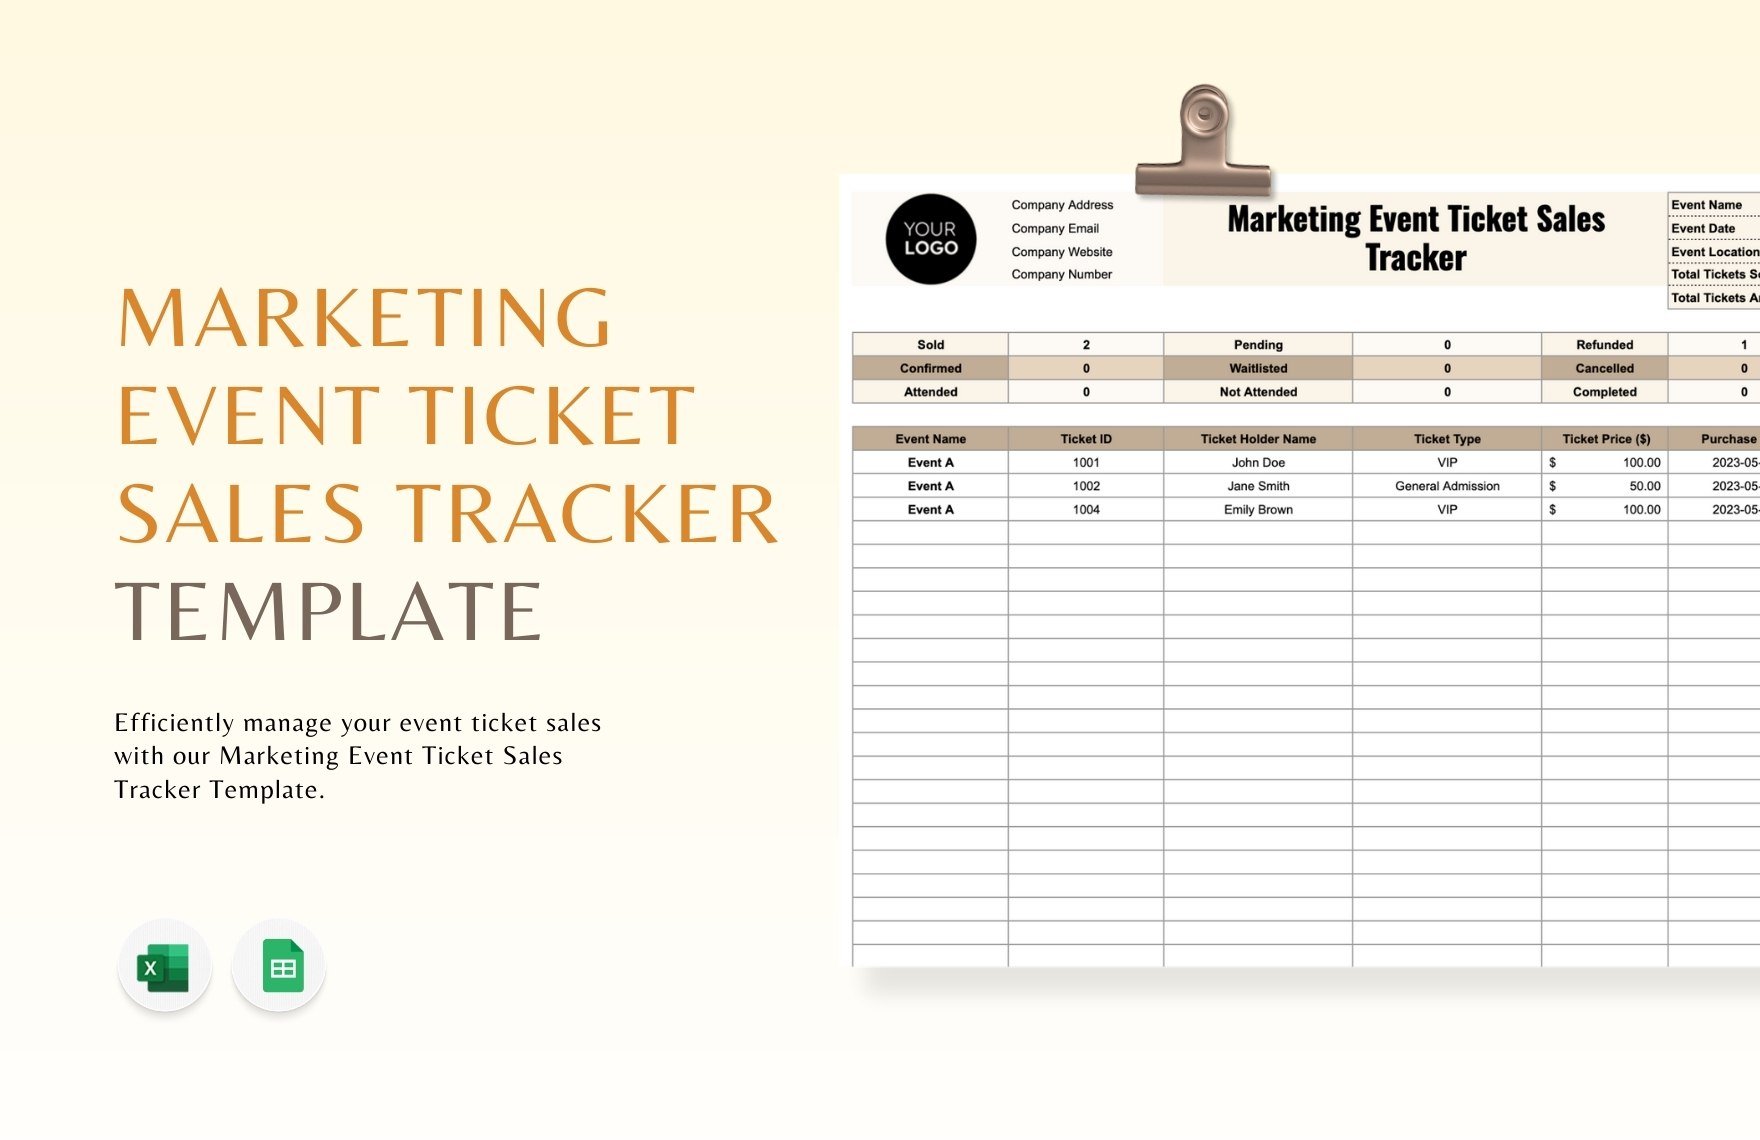 Marketing Event Ticket Sales Tracker Template